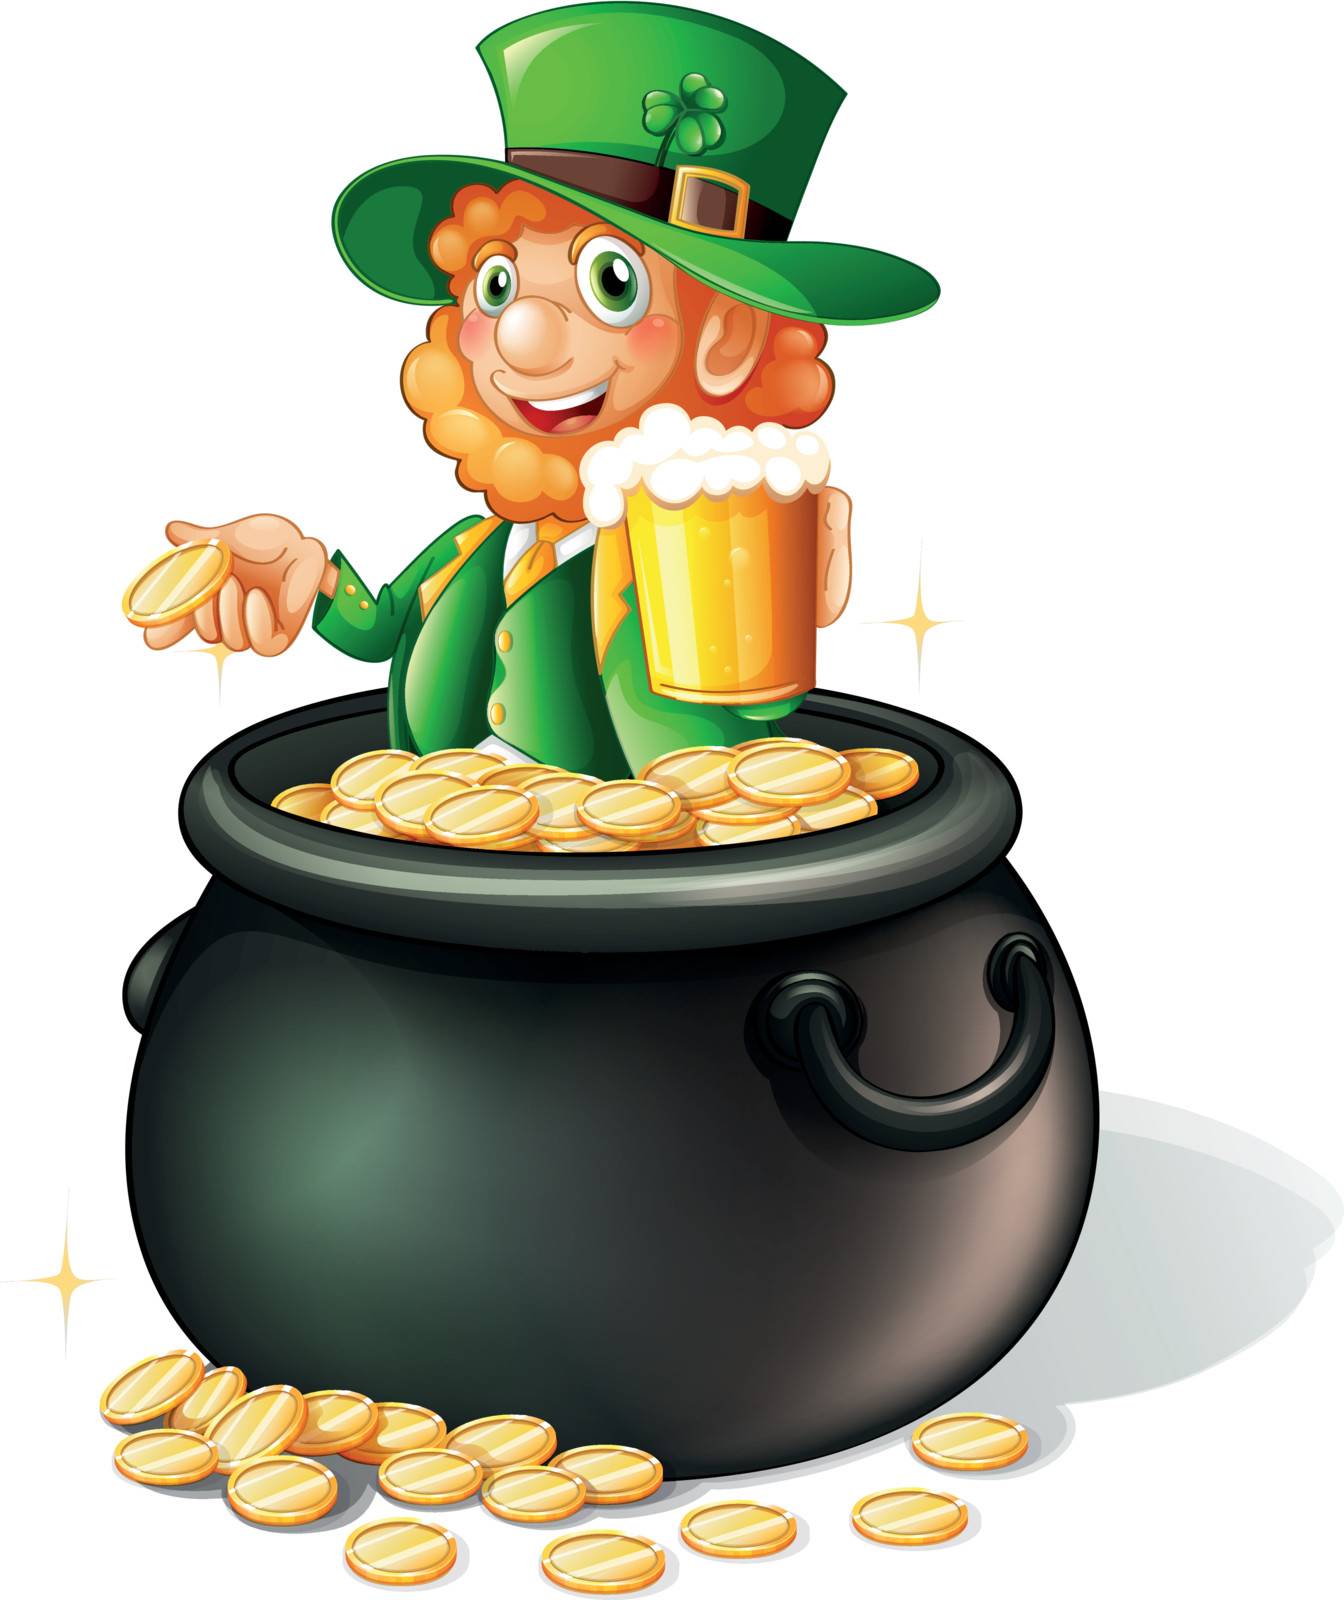 Illustration of a pot with coins and an old man with a mug of beer on a white background